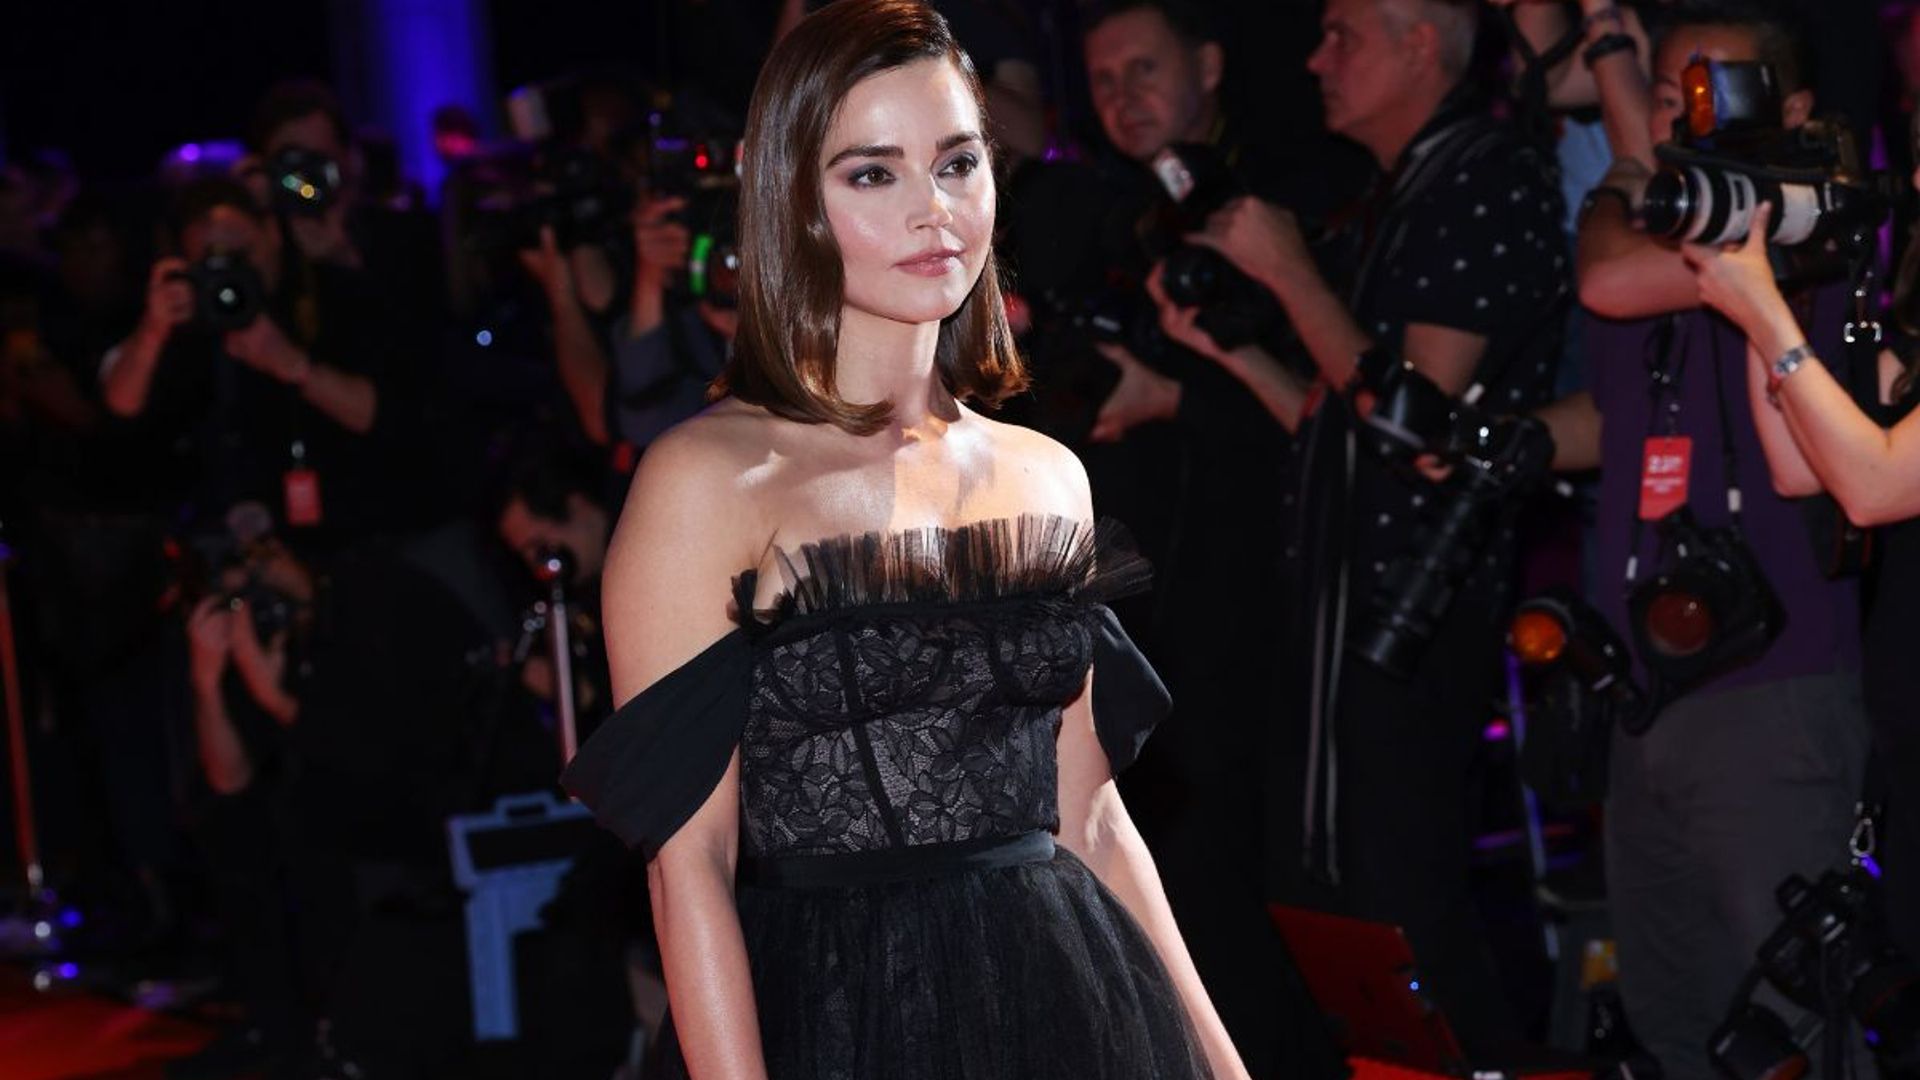 Jenna Coleman just gave old Hollywood glamour a contemporary makeover ...